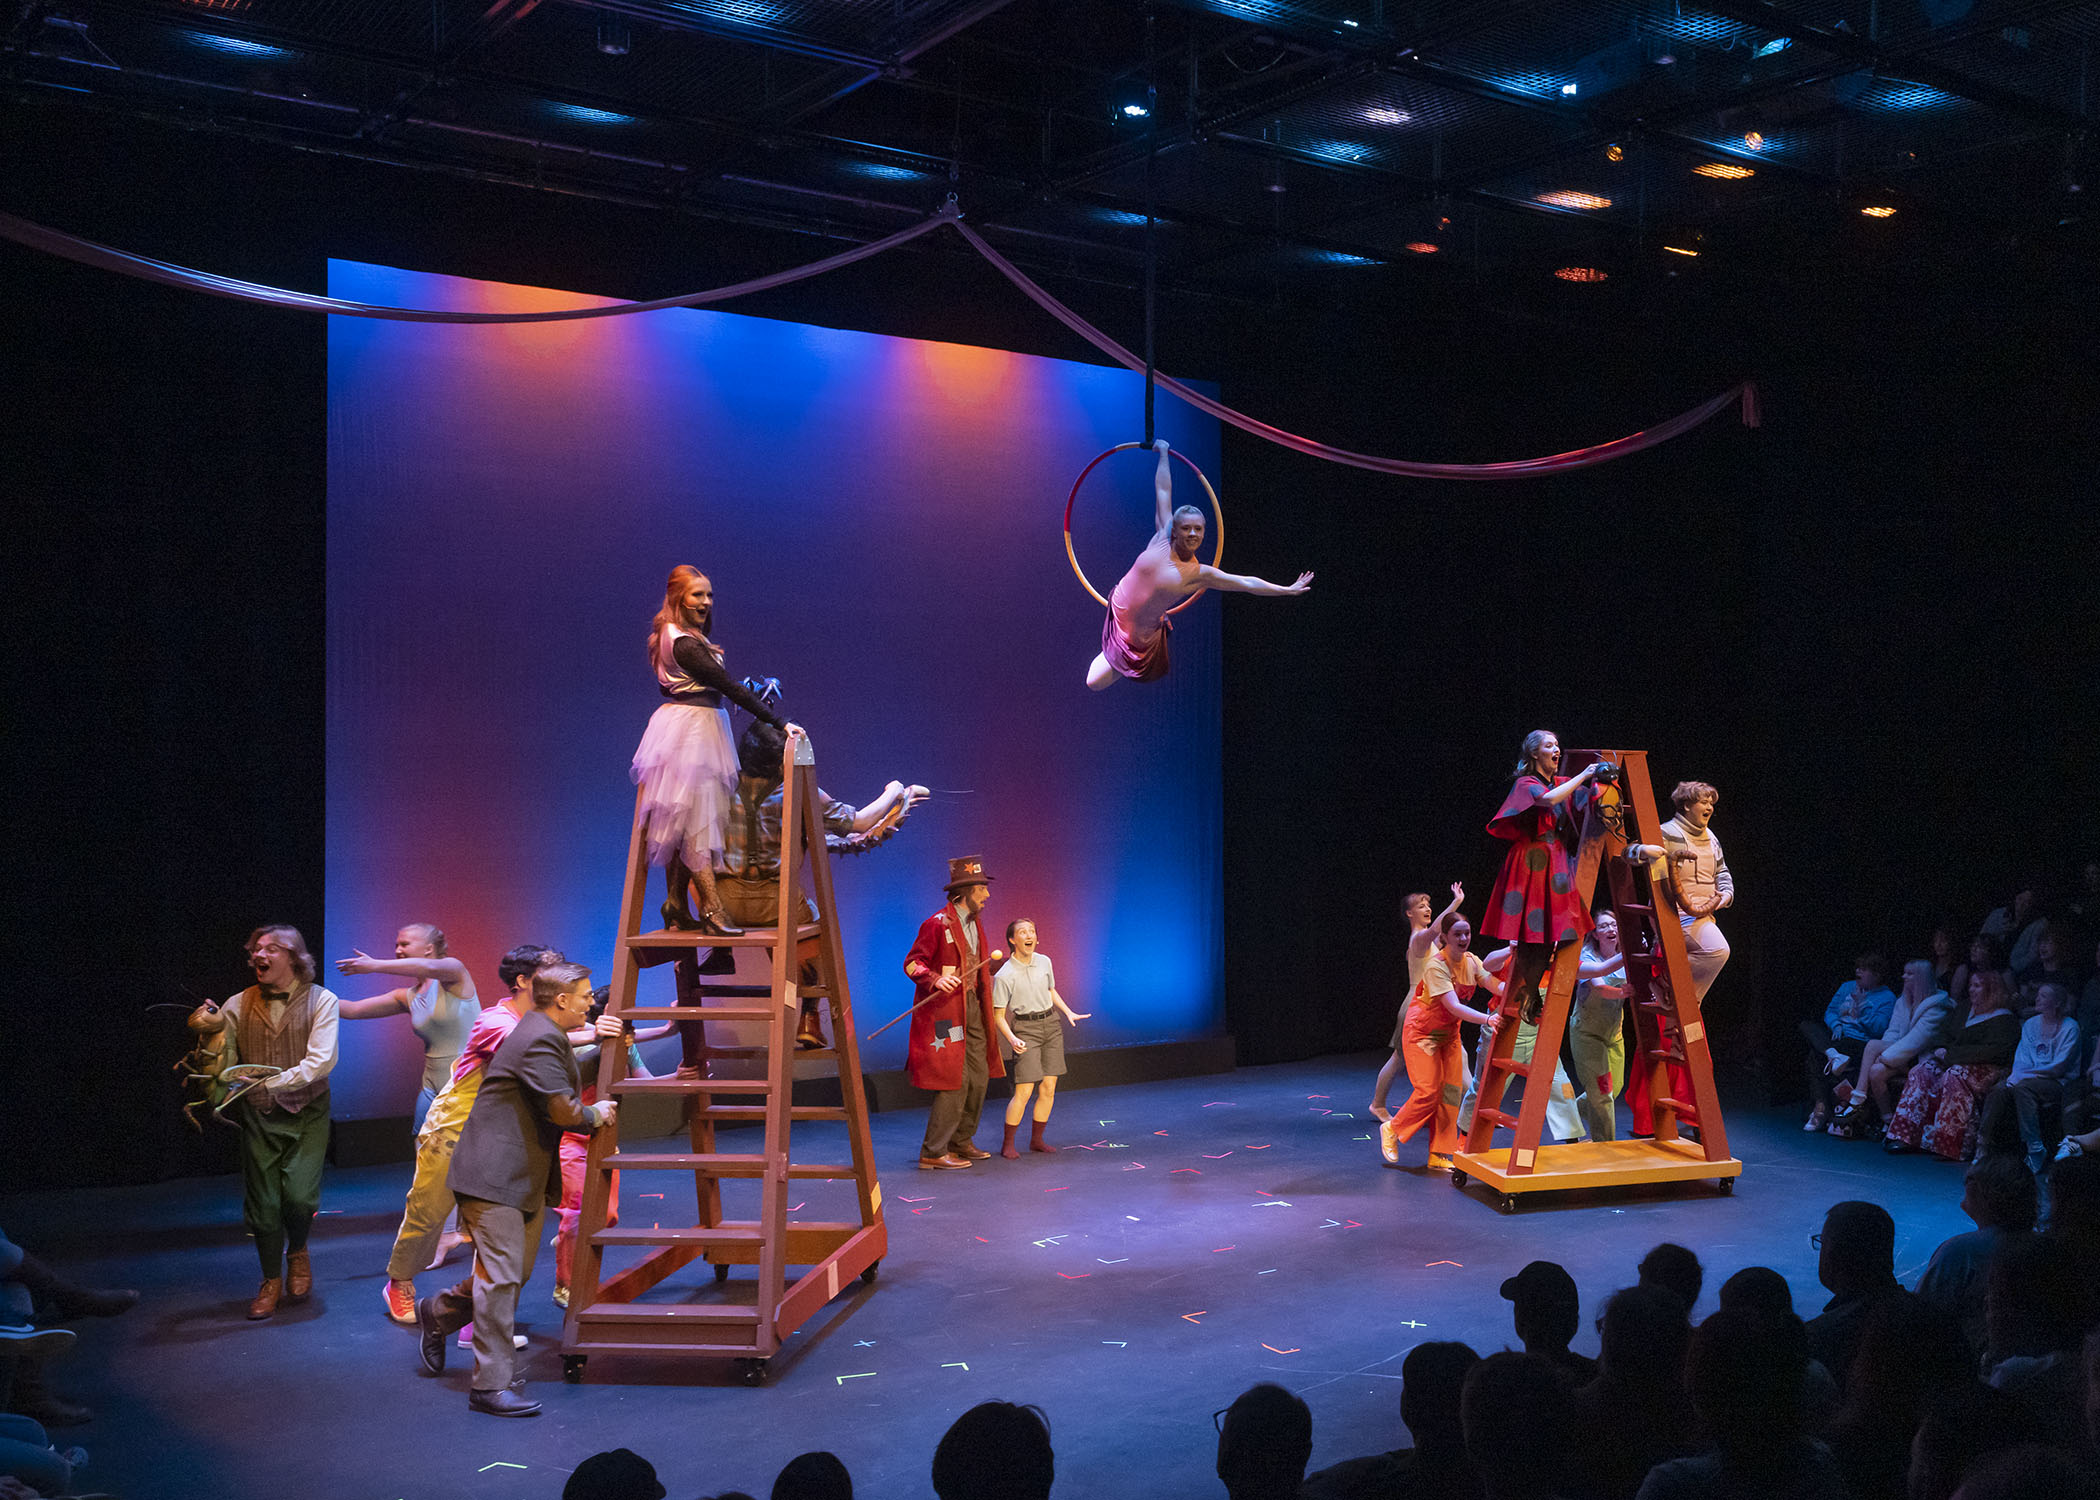 ETSU aerial dance students fly through the air as part of a performance of James and the Giant Peach